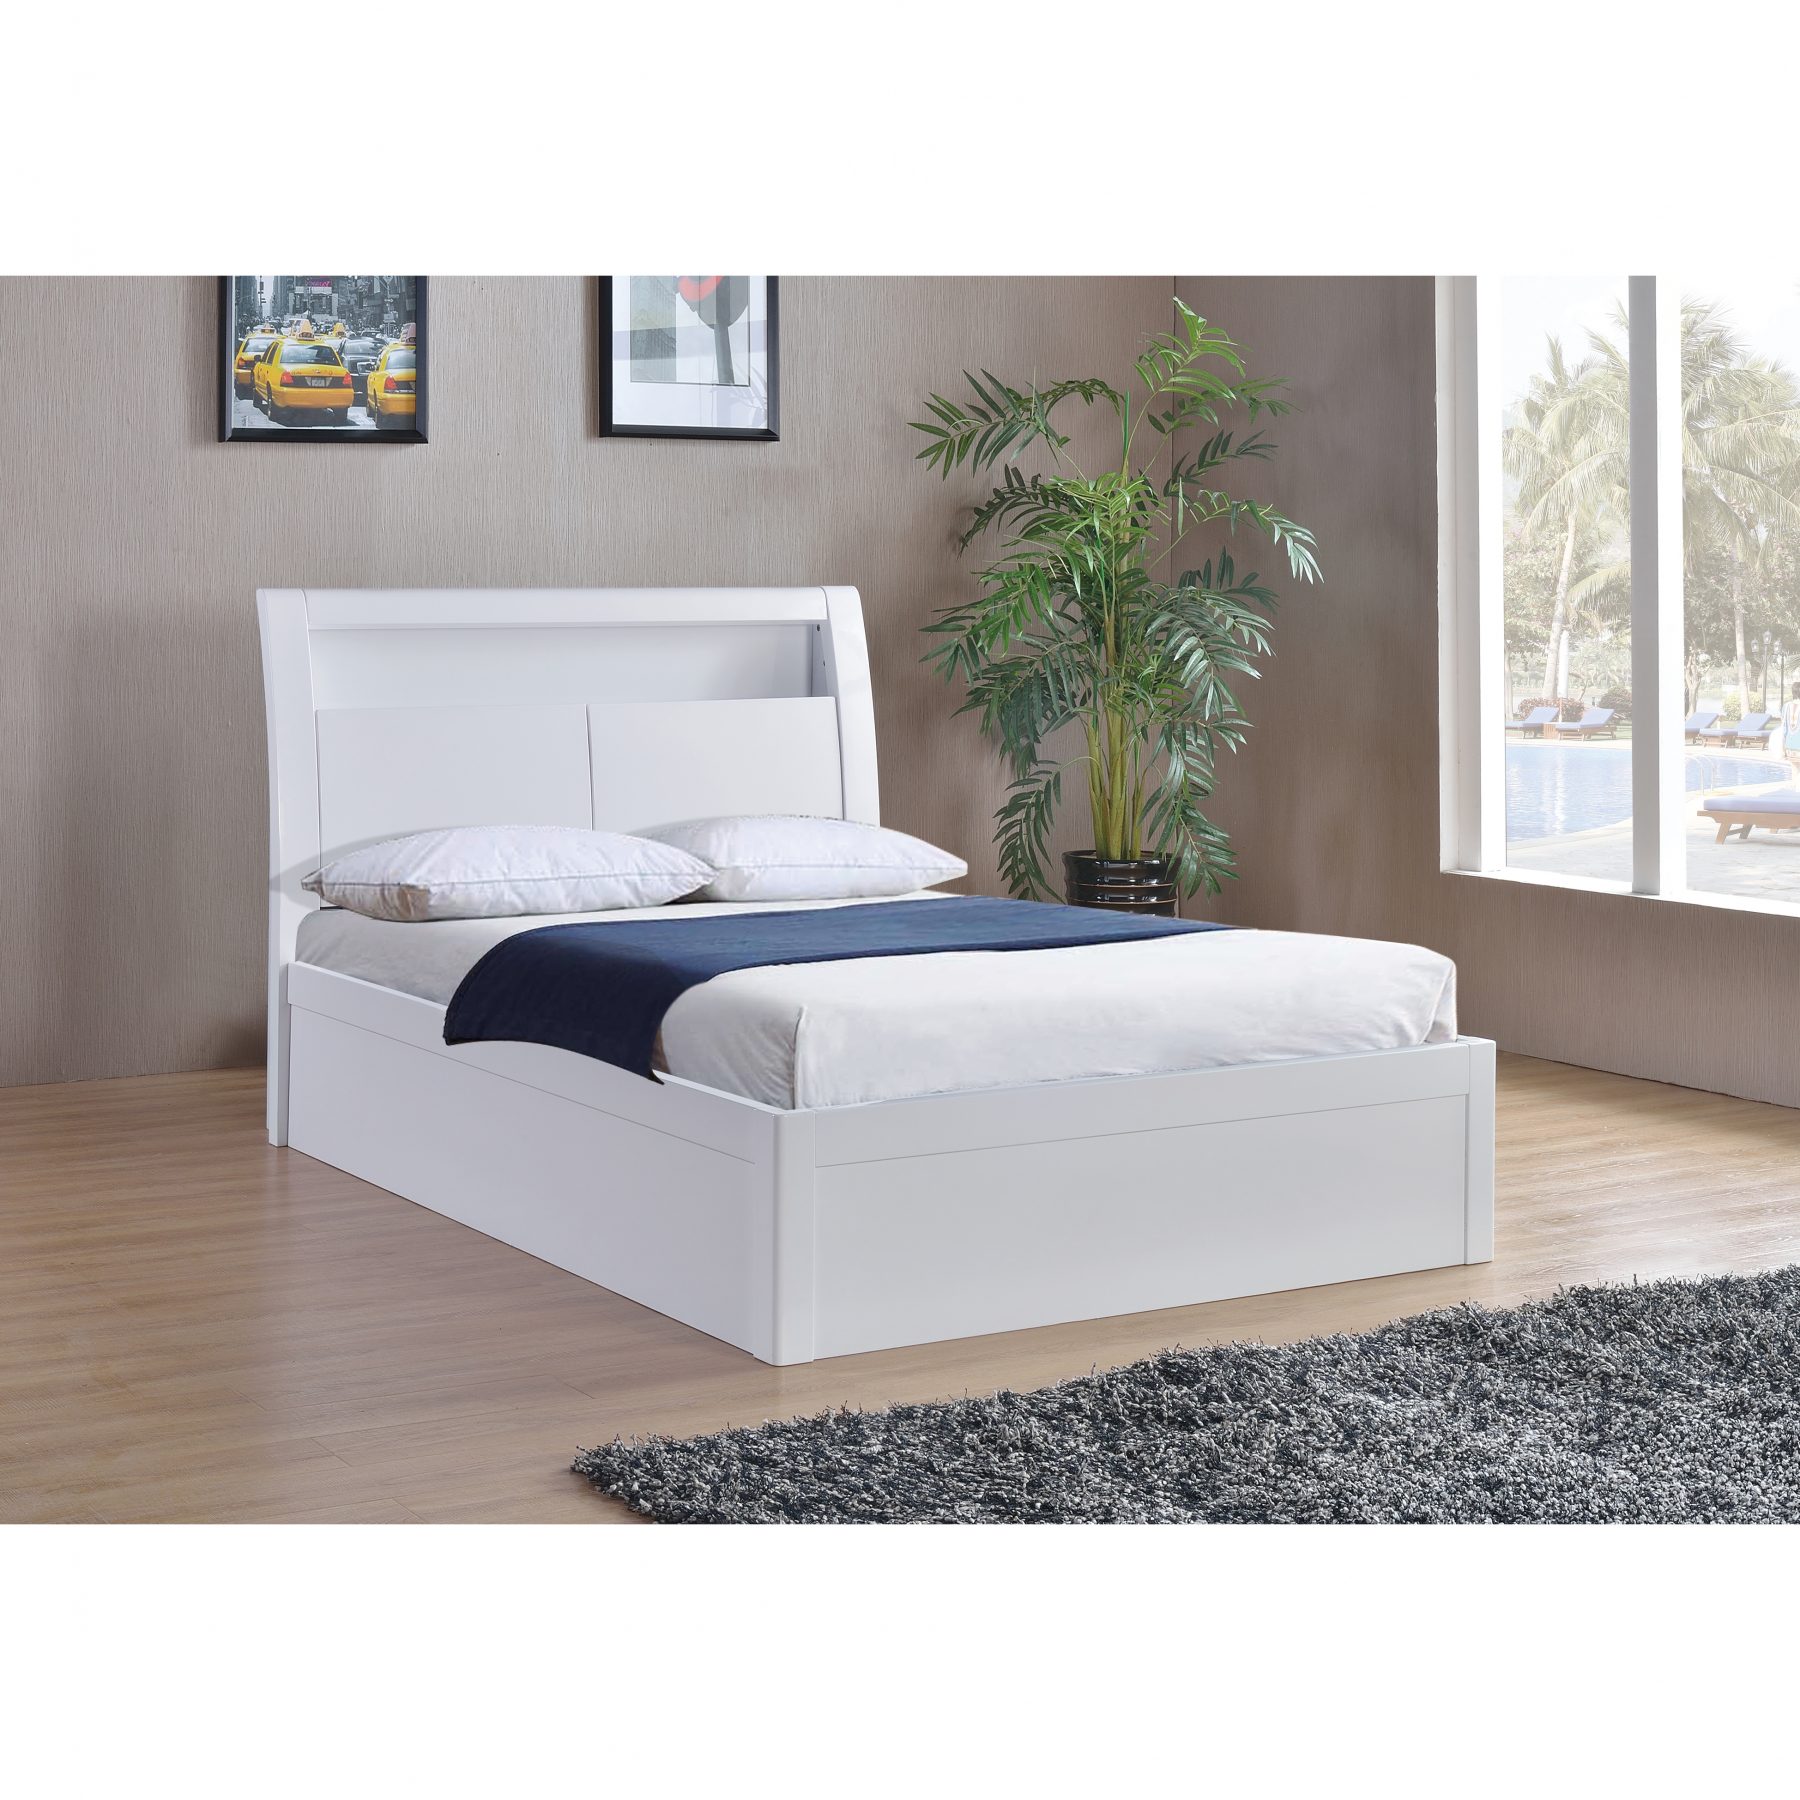 Tolga White High Gloss Storage Bed, White Gloss Bed Frame With Storage